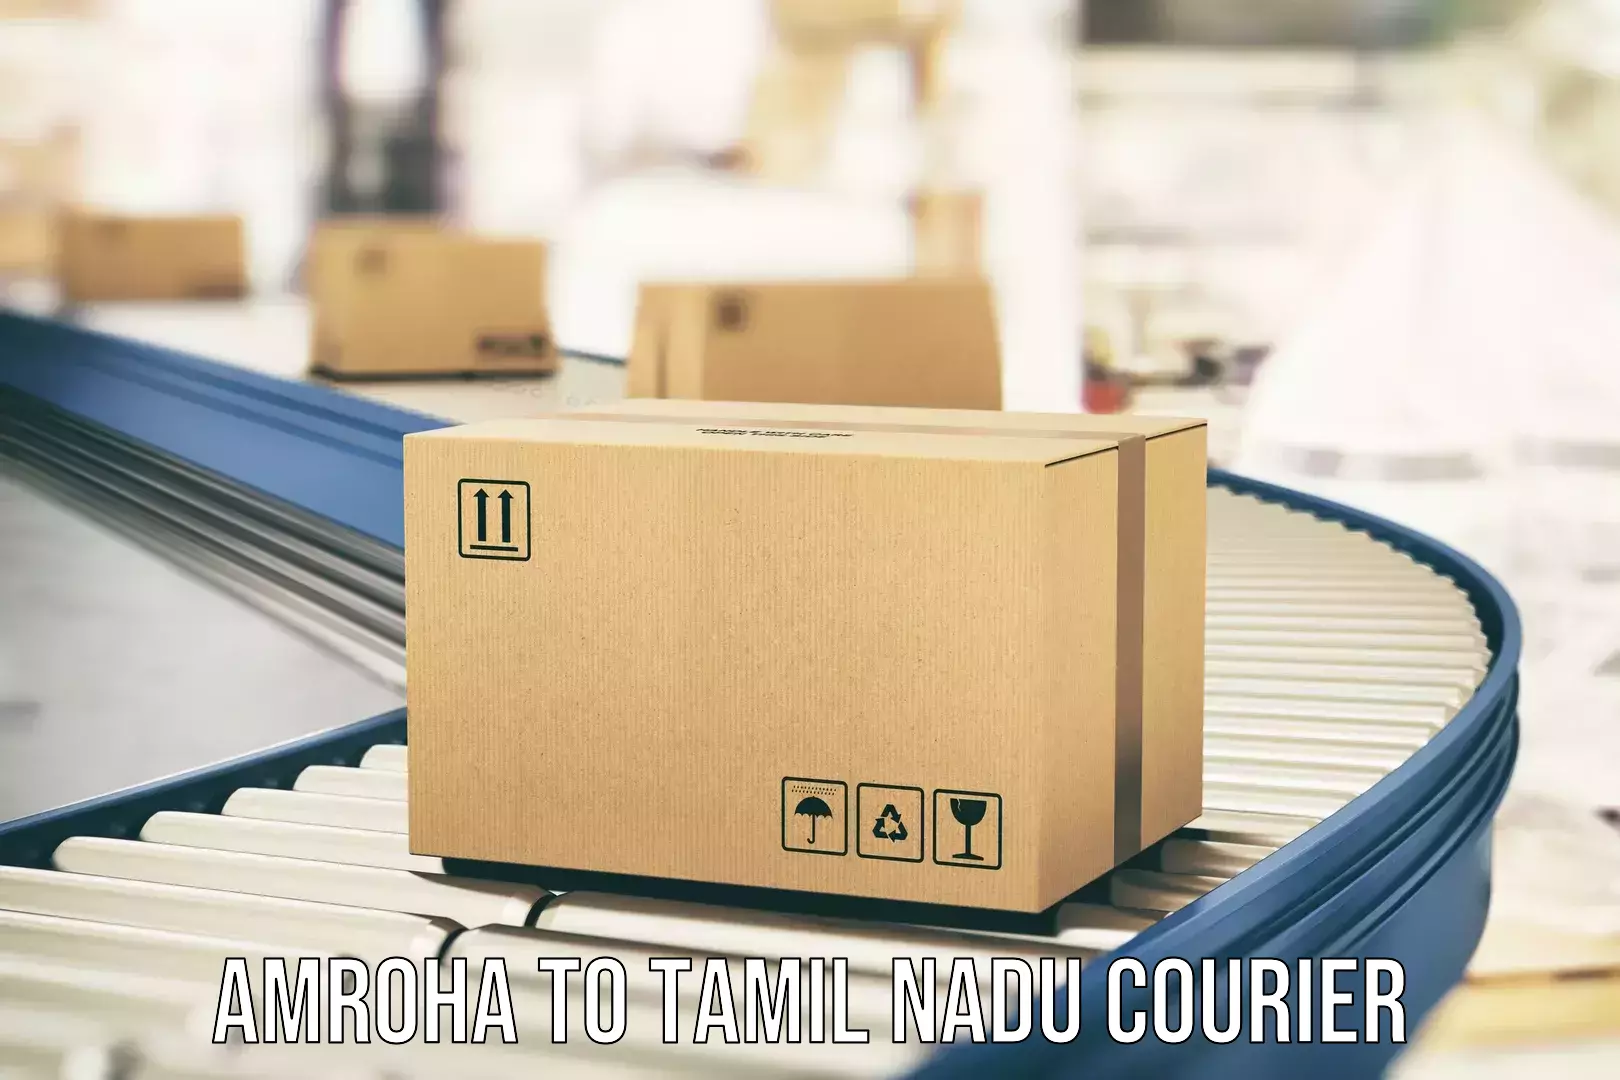 Furniture relocation experts Amroha to Mettur